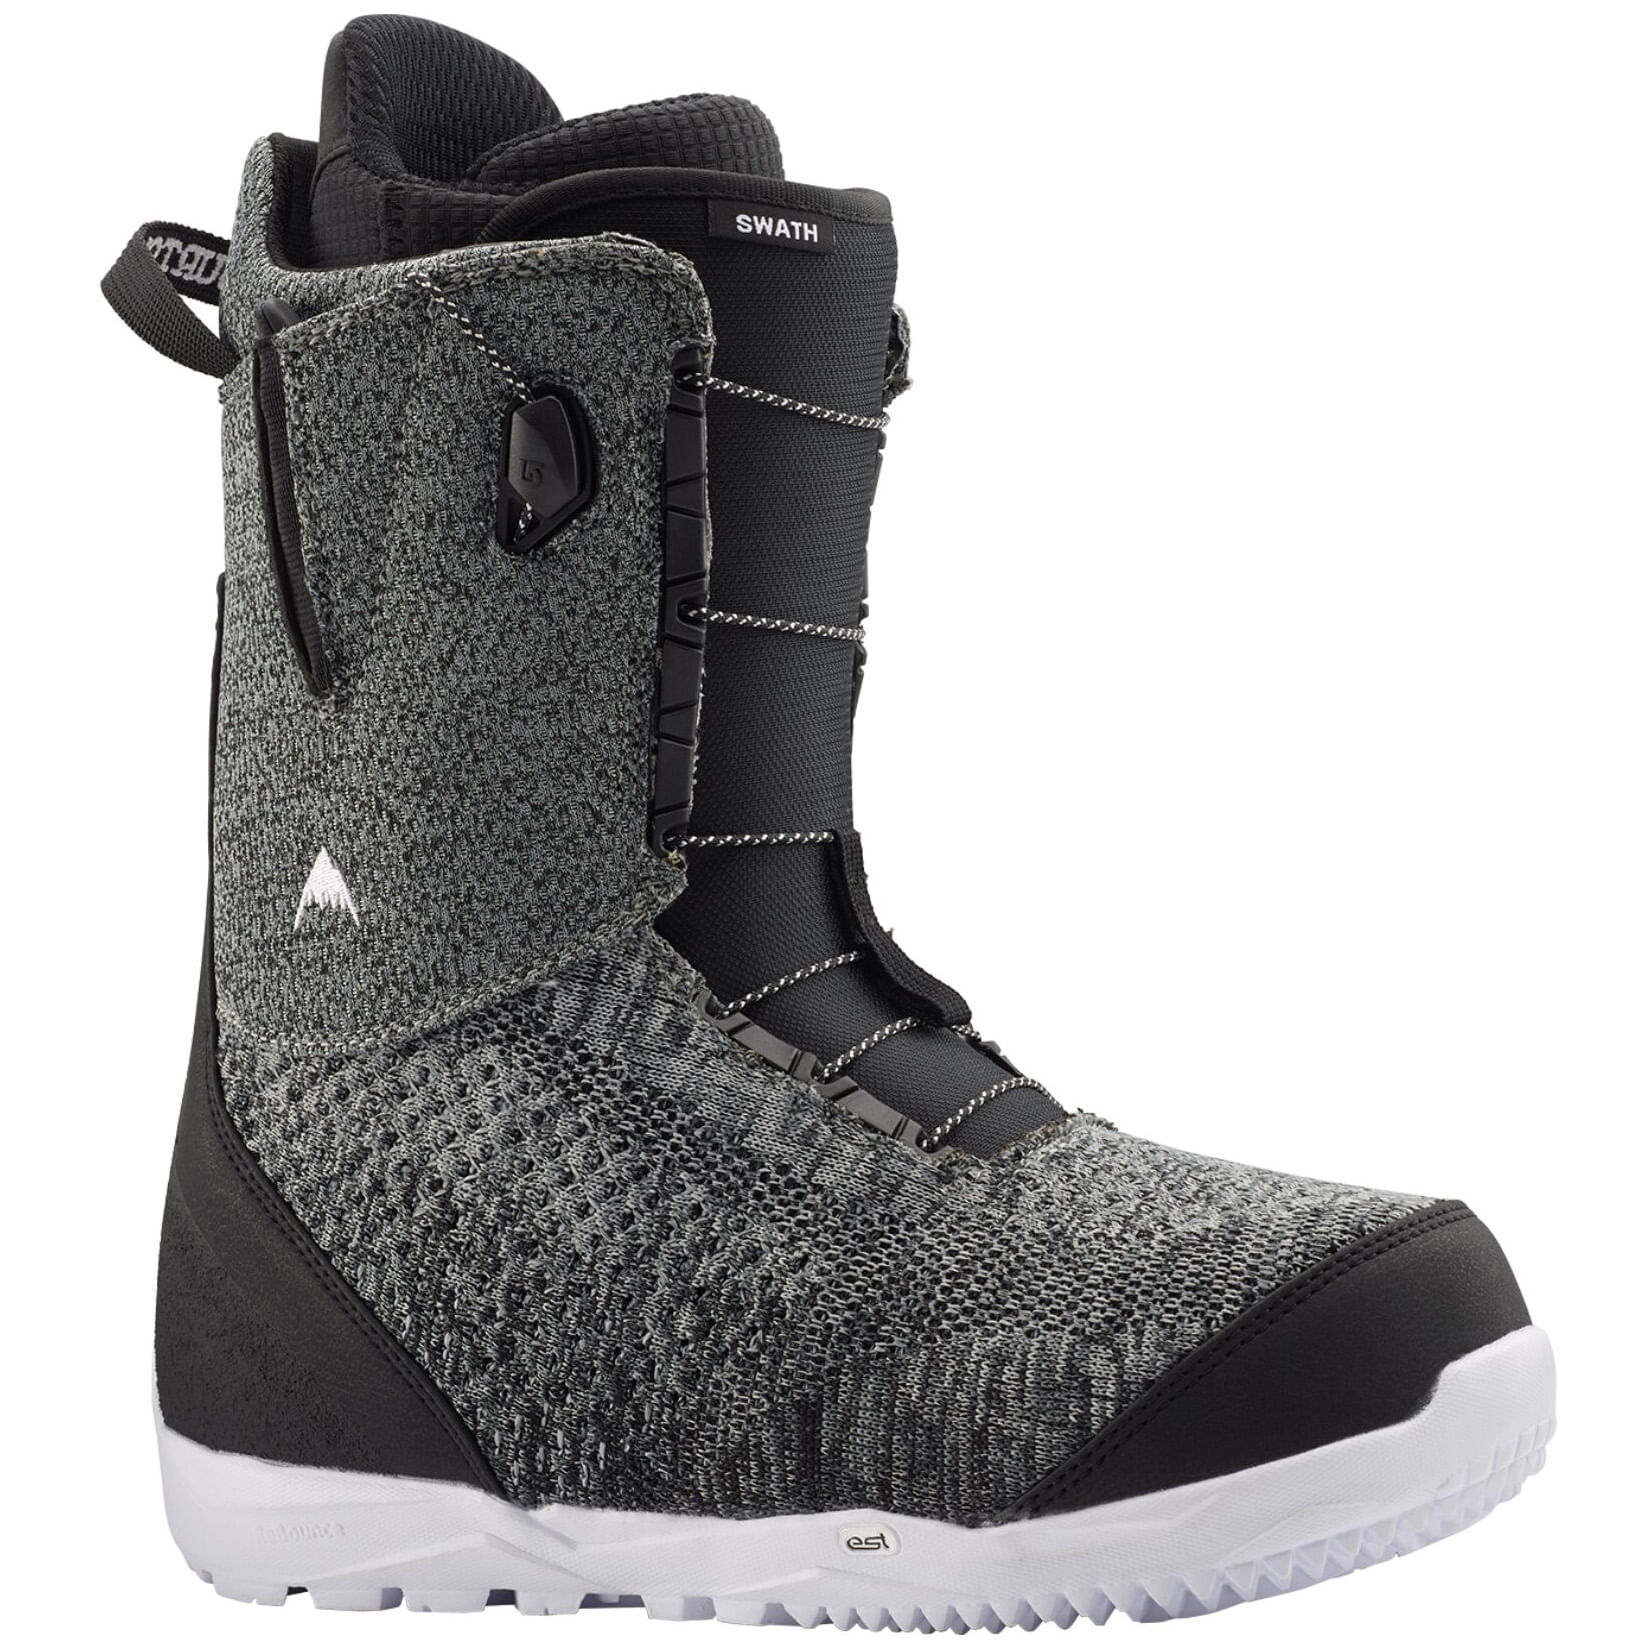 top 1 snowboard boots 219